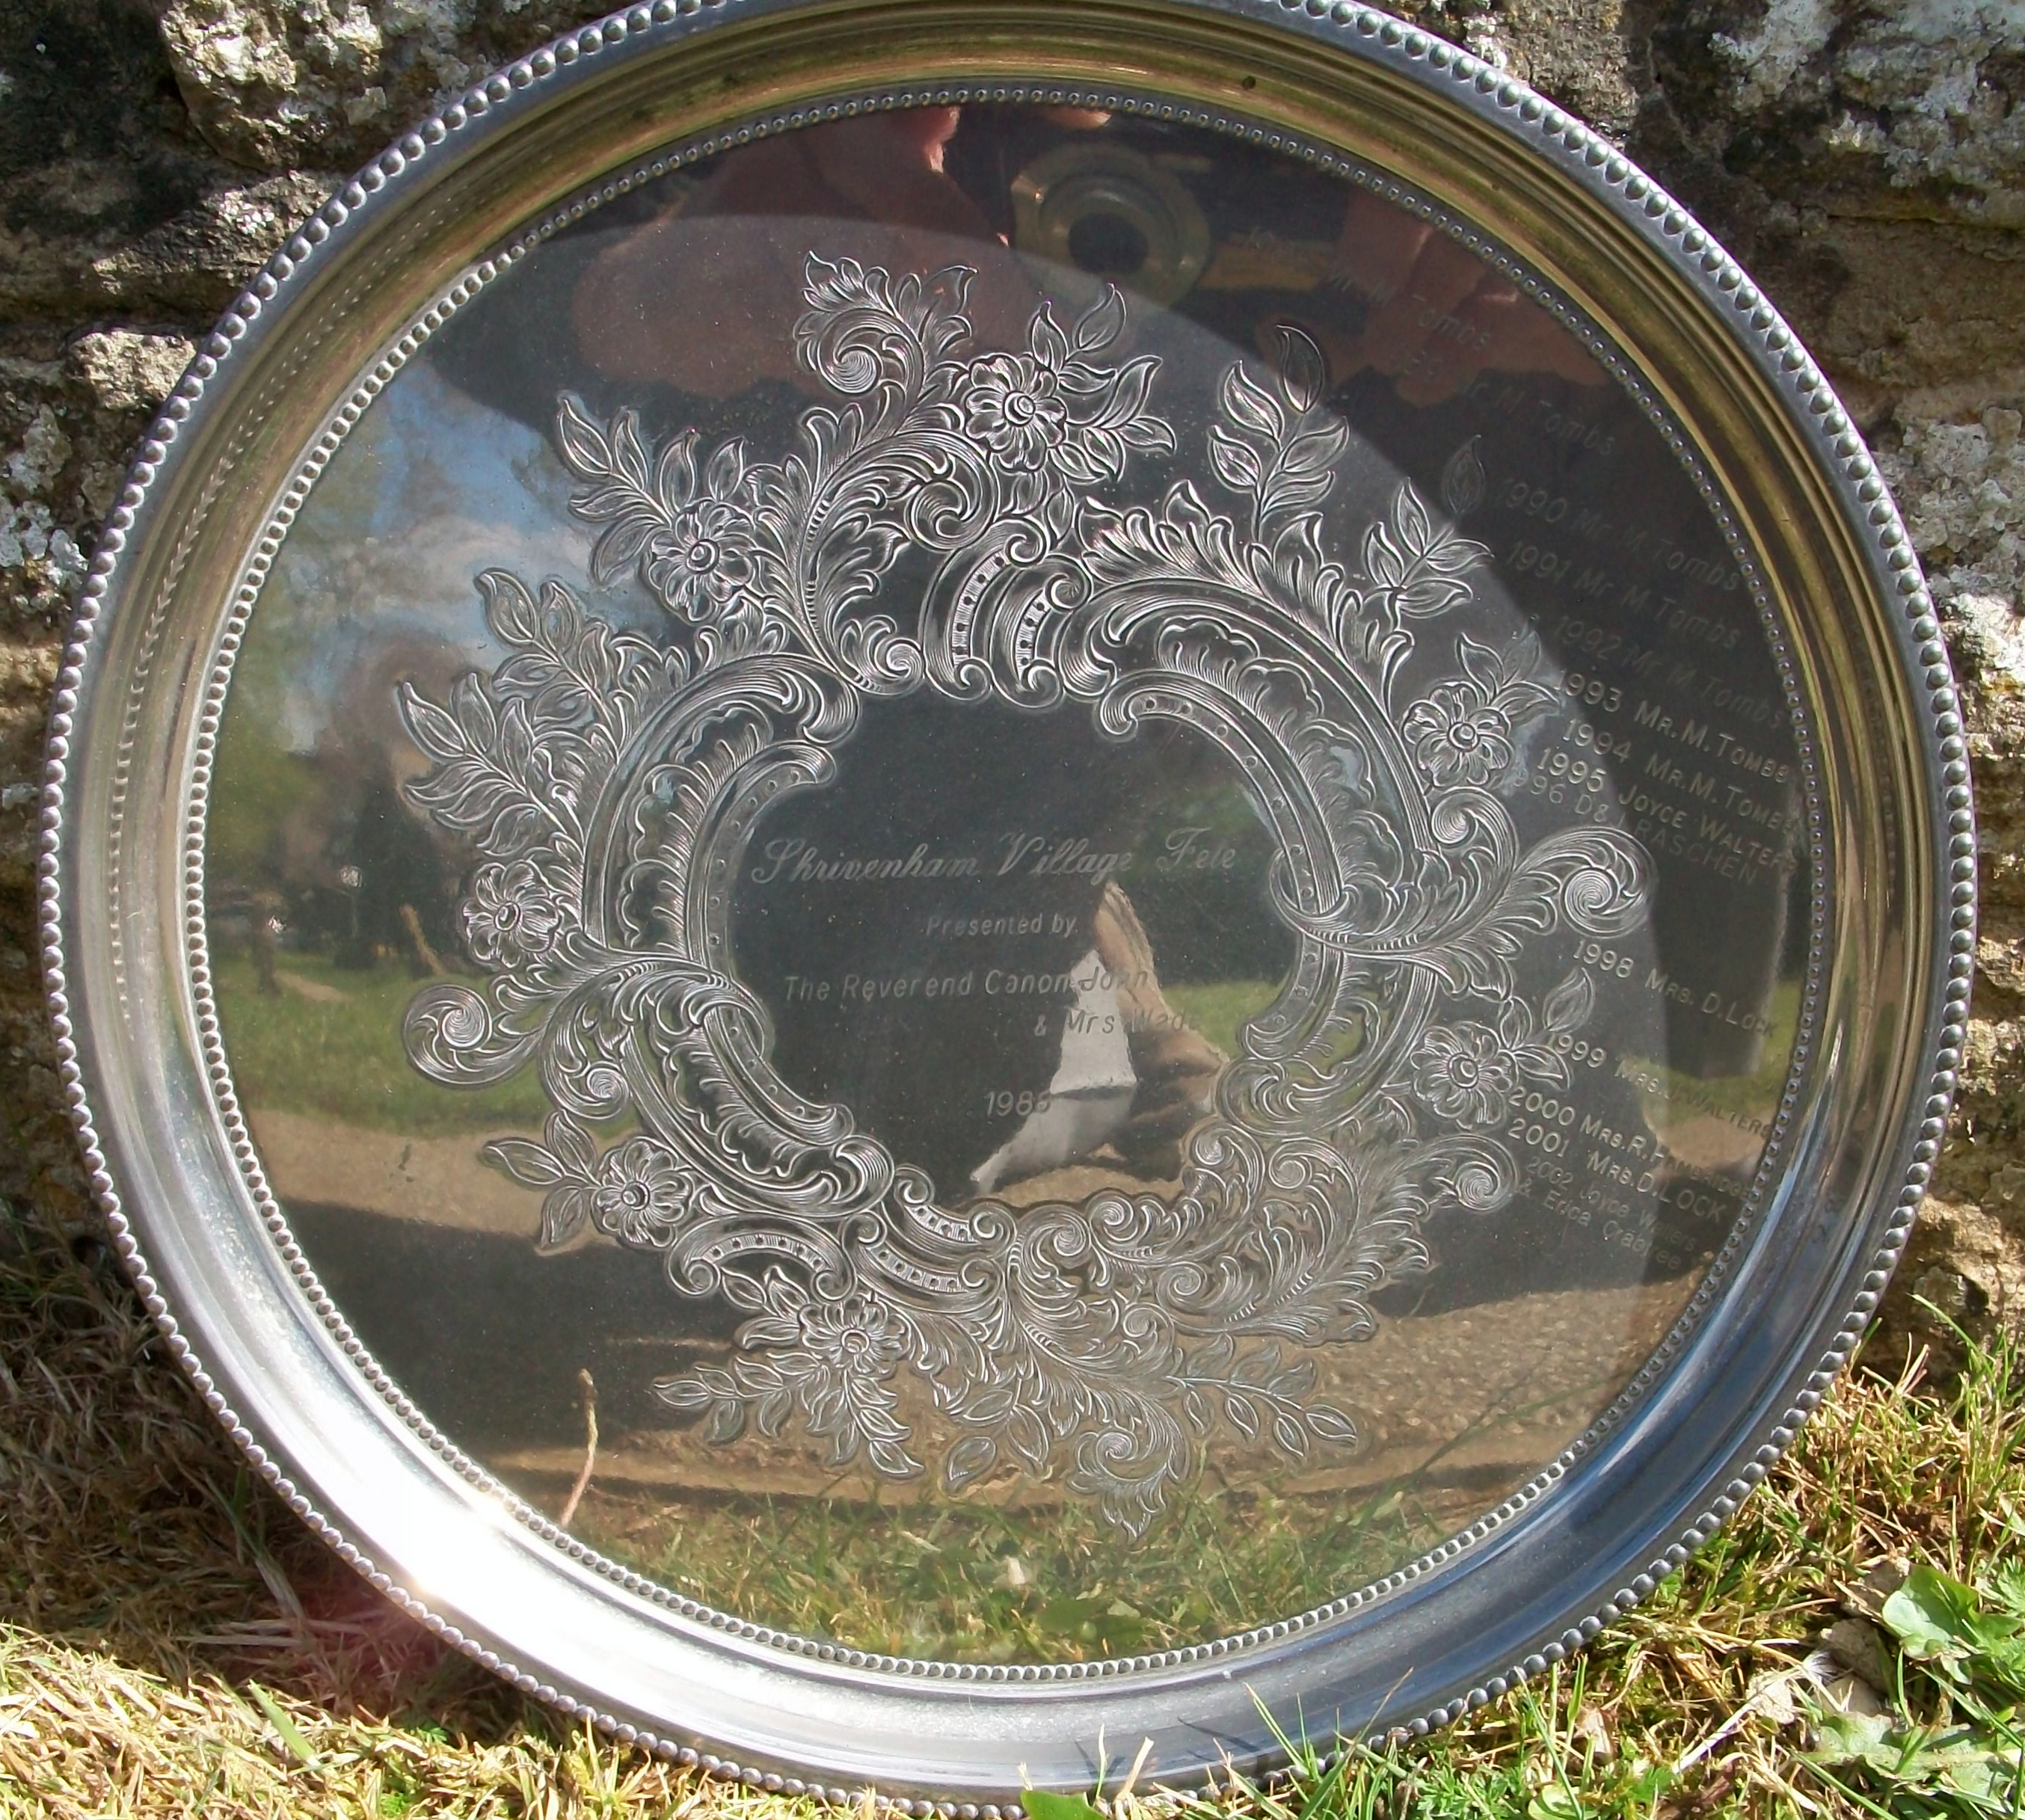 The Silver Plate donated by Rev Wade